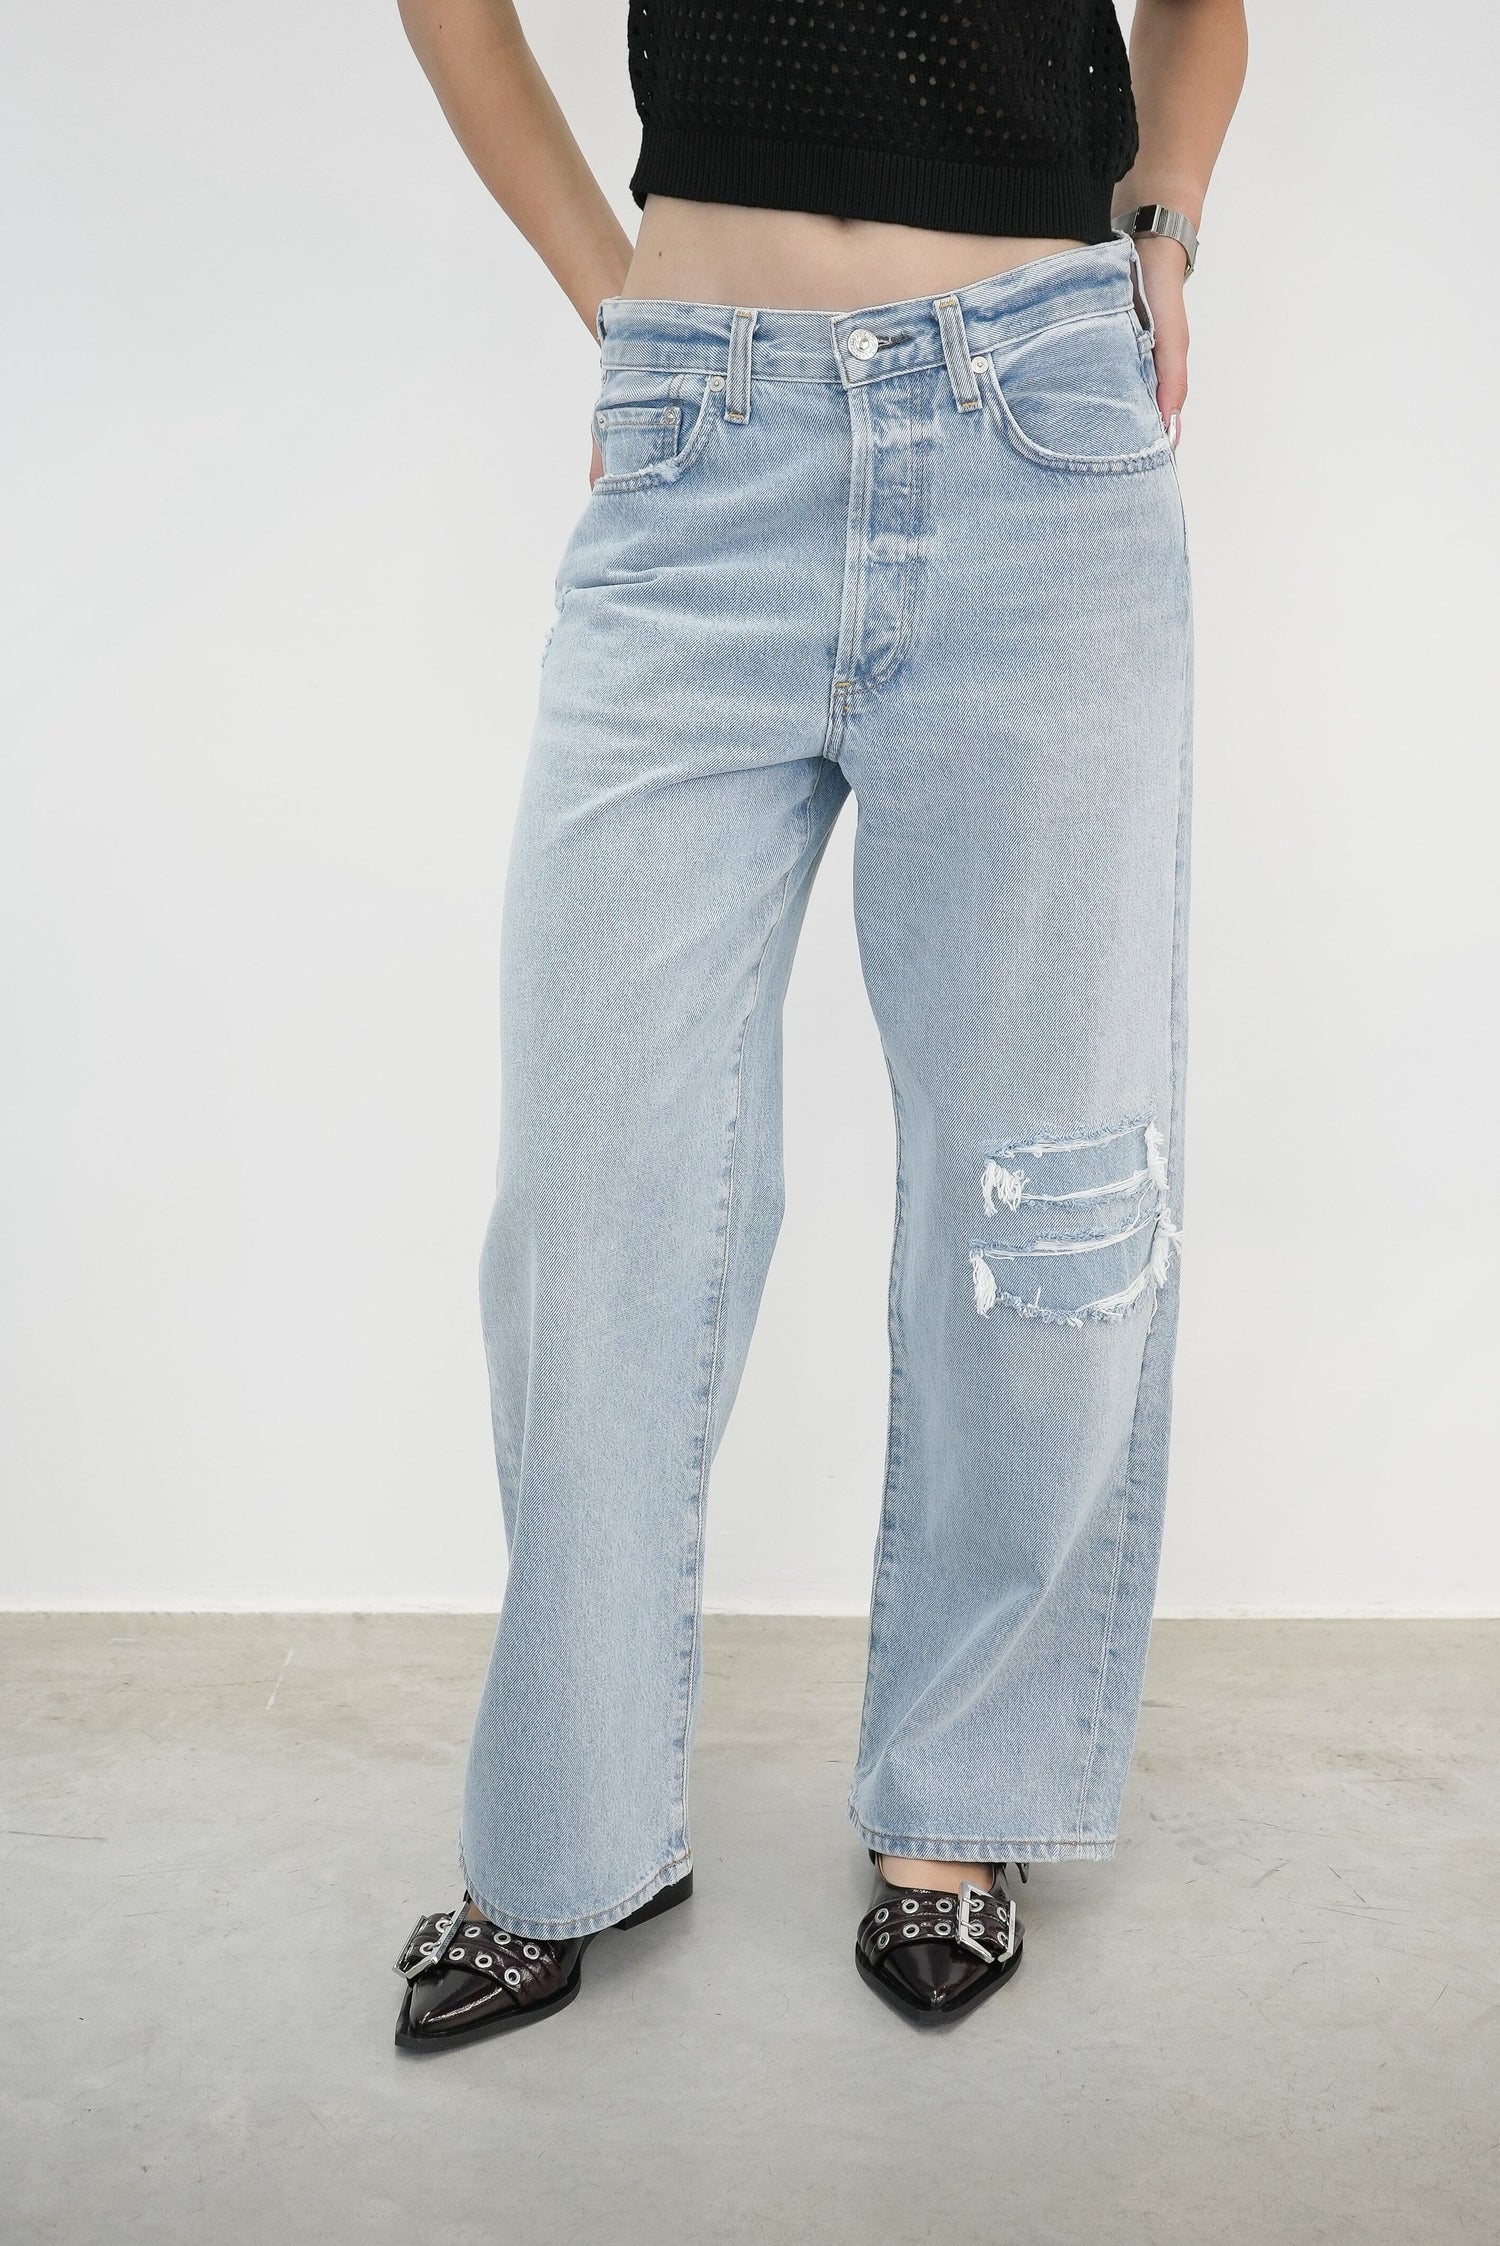 PINA LOW RISE BAGGY JEANS CROP IN CASCADE JEANS CITIZENS OF HUMANITY 